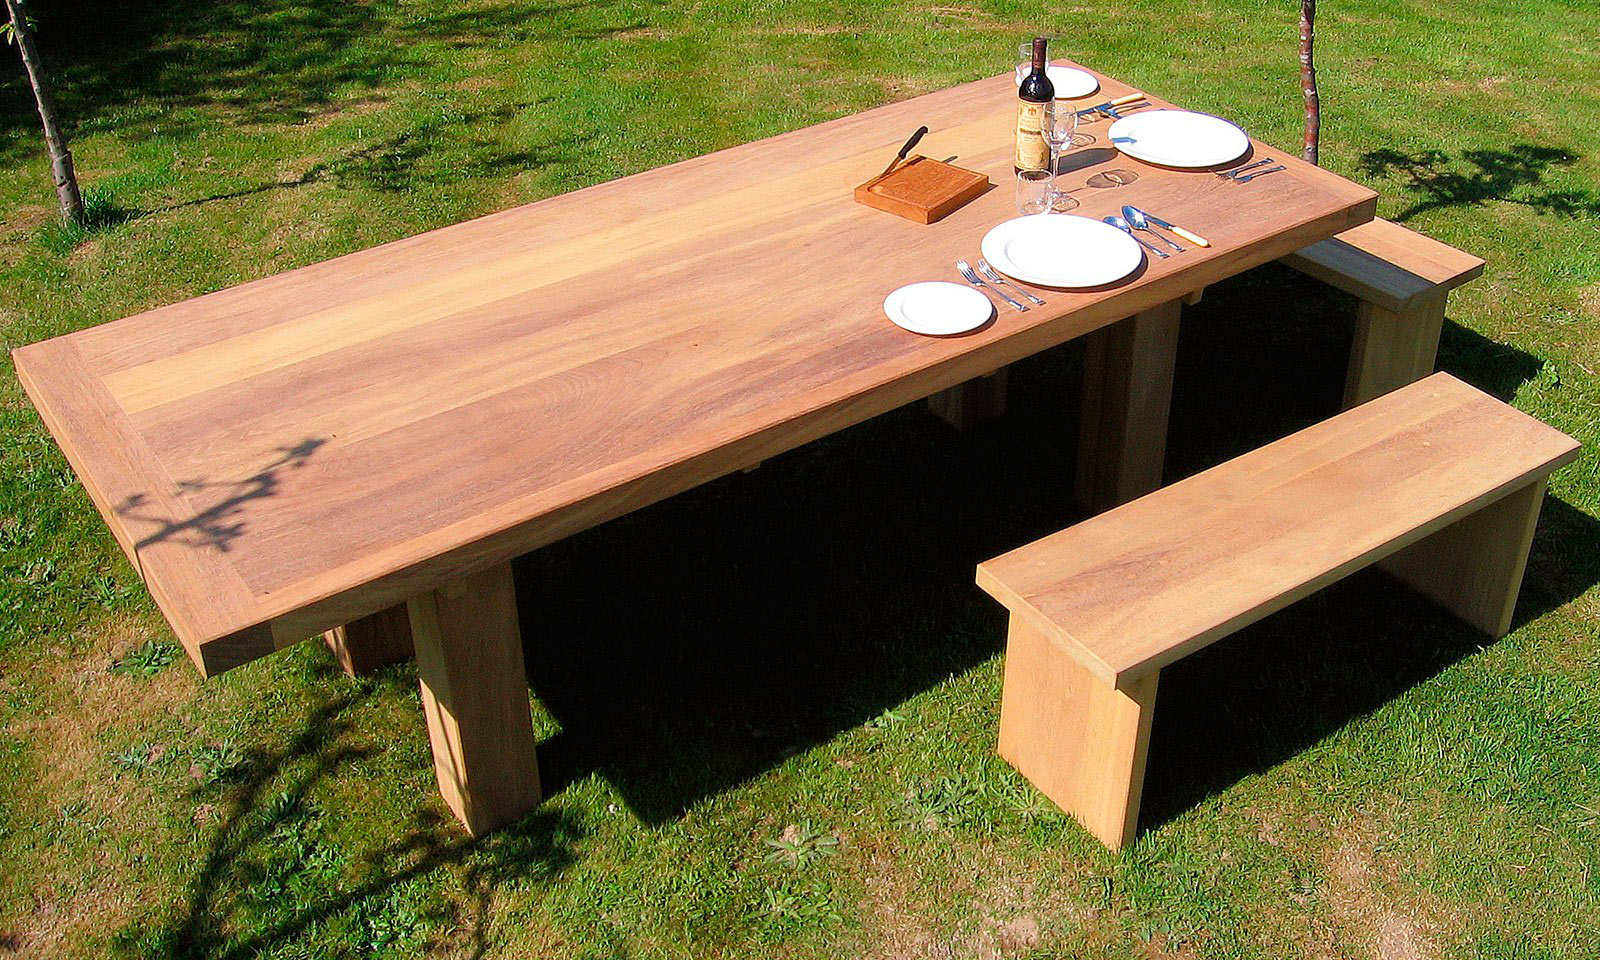 Iroko Table, with matching bench seats. A bespoke, handmade garden table manufactured out of Iroko hardwood. Quality hand-crafted exterior furniture designed and built by Mounts Hill Woodcraft.